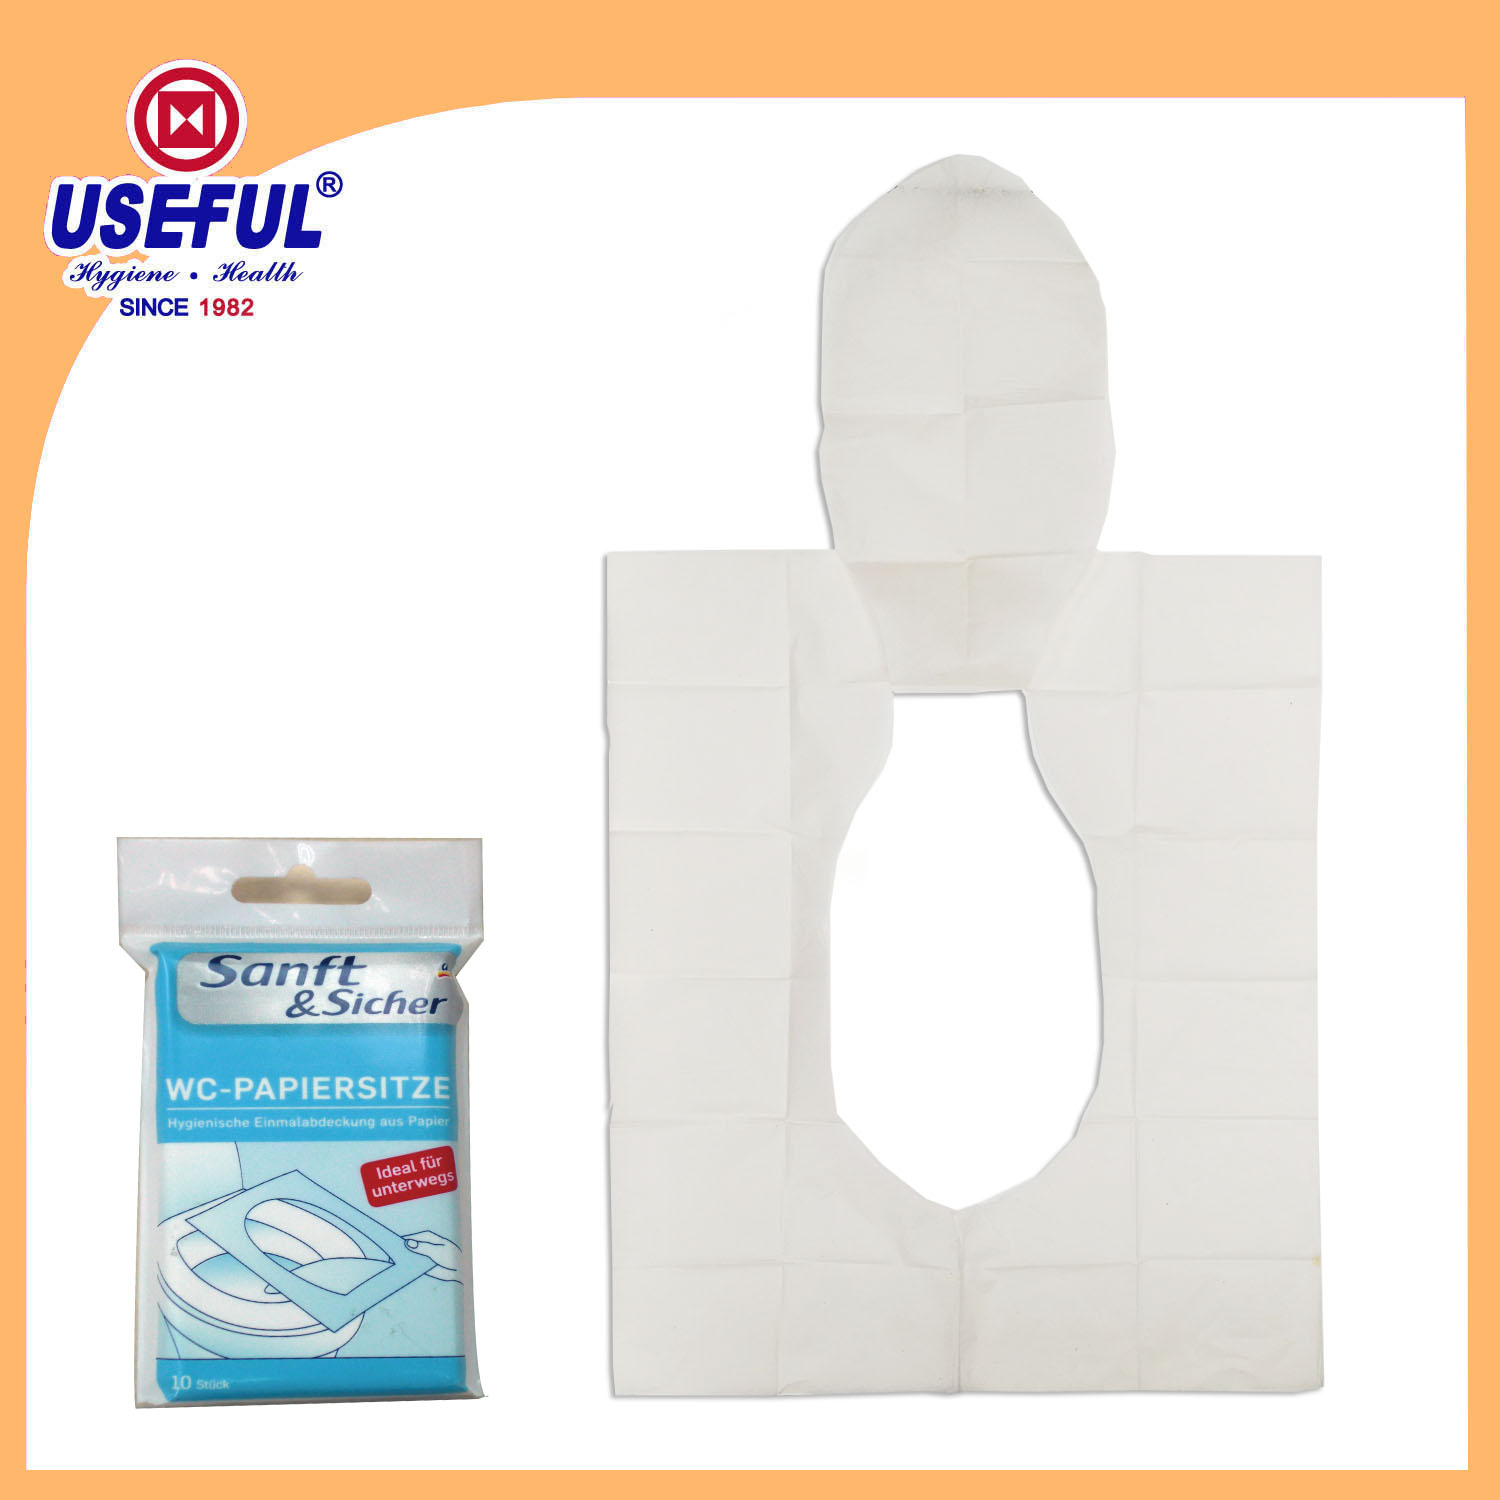 Individual Pack of Flushable Toilet Seat Cover for promotion